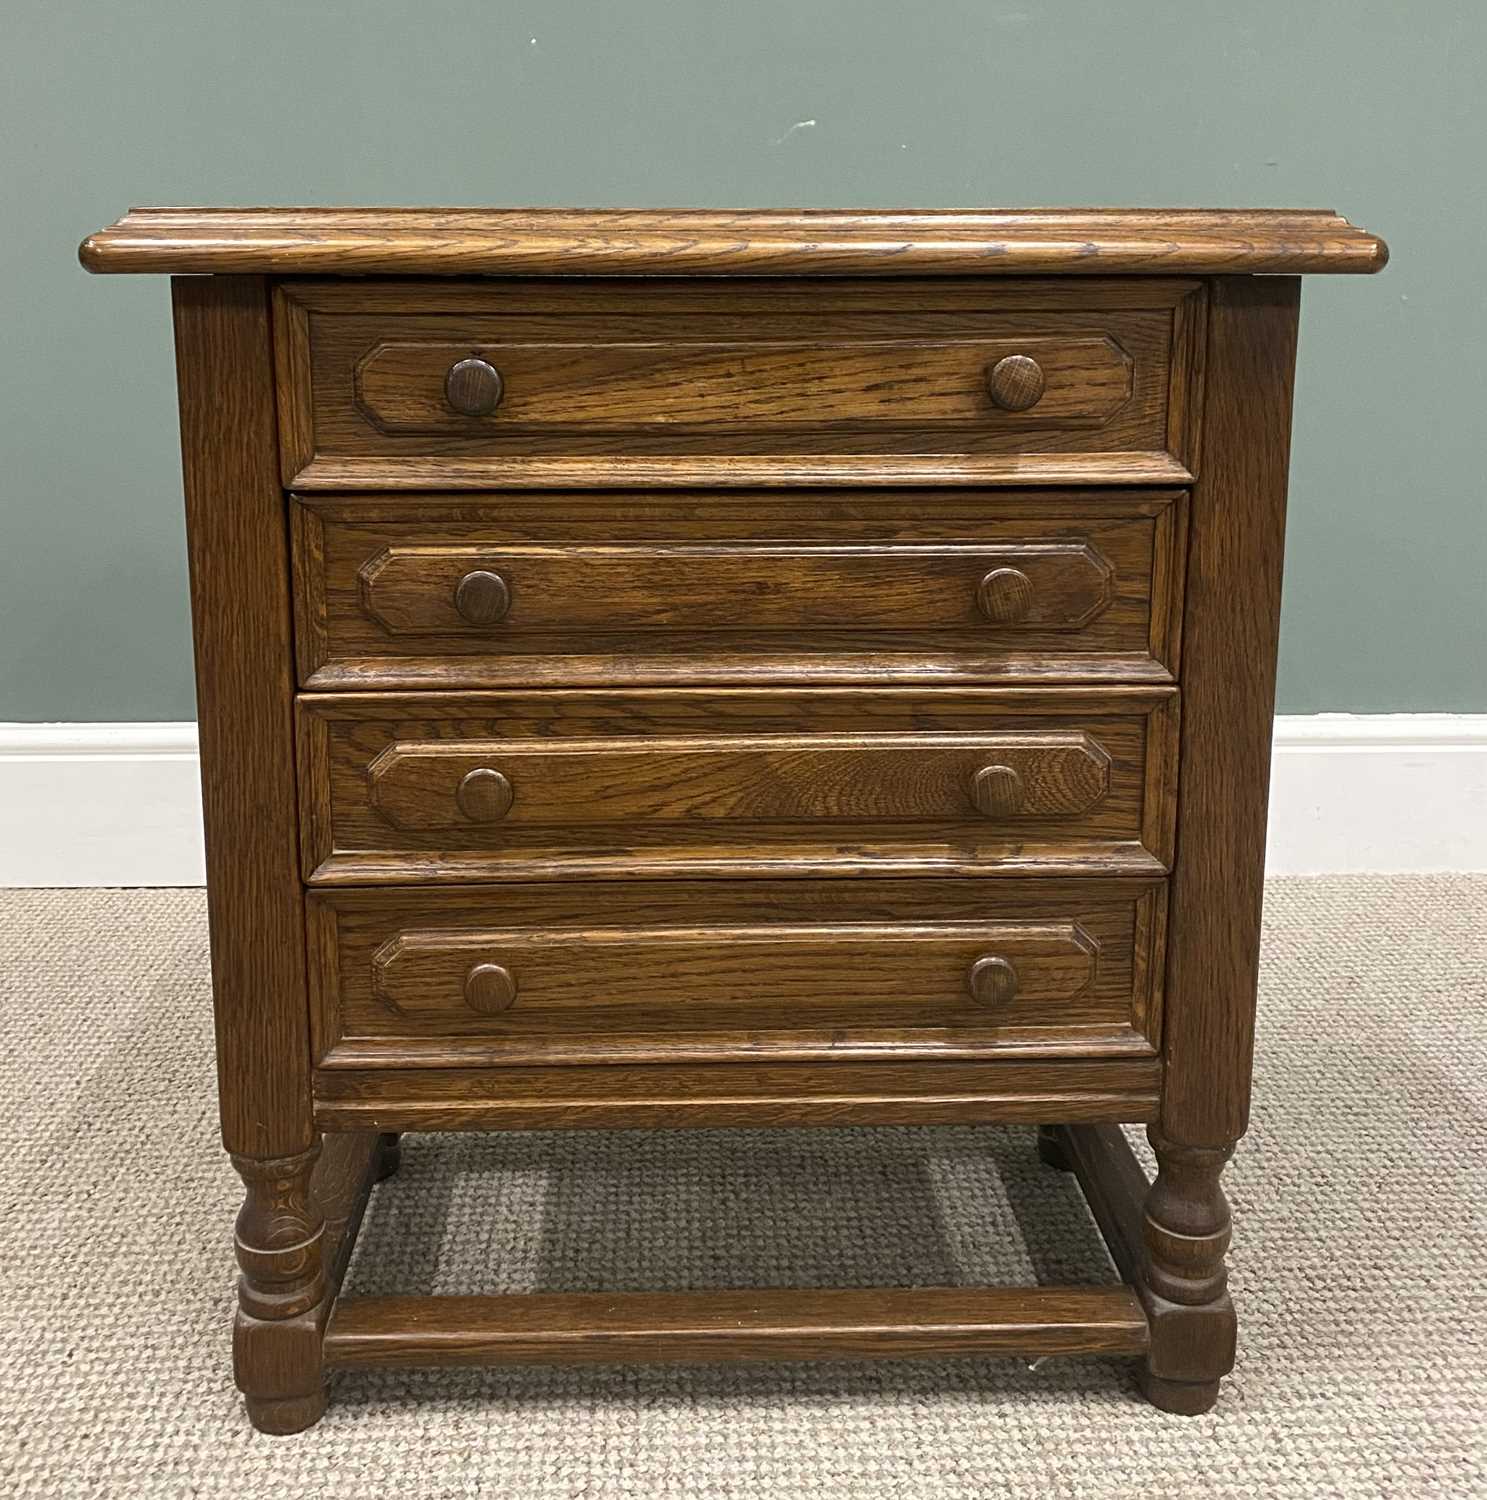 NEAT REPRODUCTION OAK CHEST OF FOUR DRAWERS with turned wooden knobs, on turned and block supports